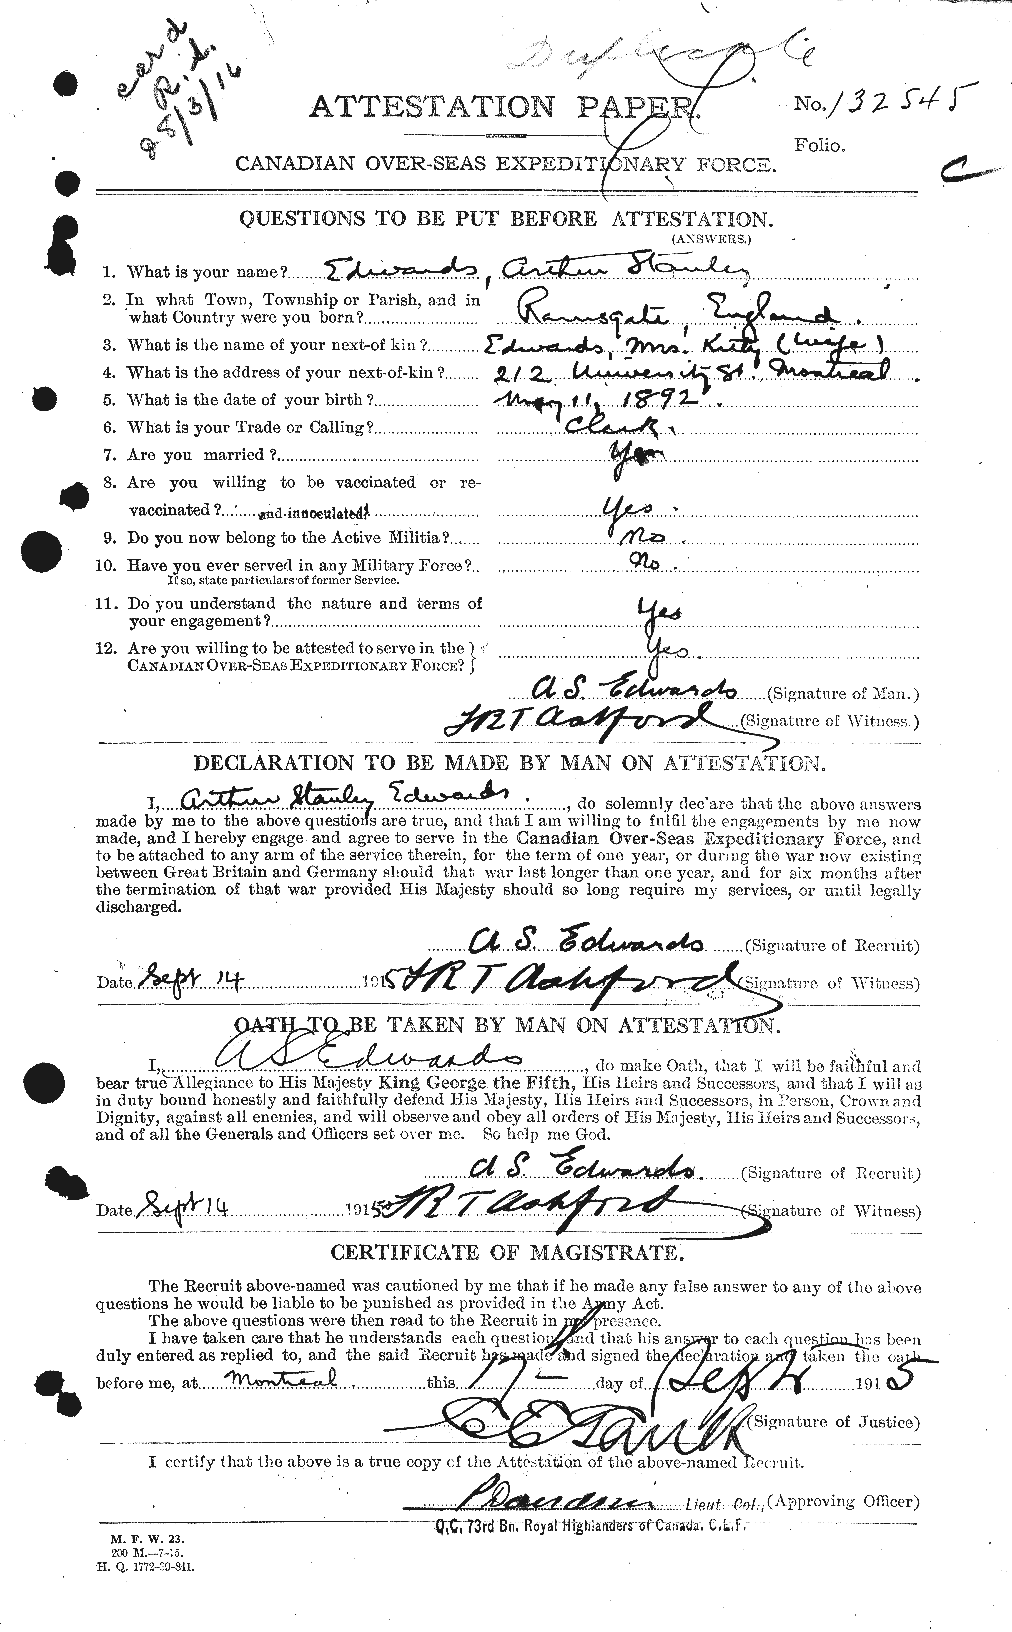 Personnel Records of the First World War - CEF 313145a